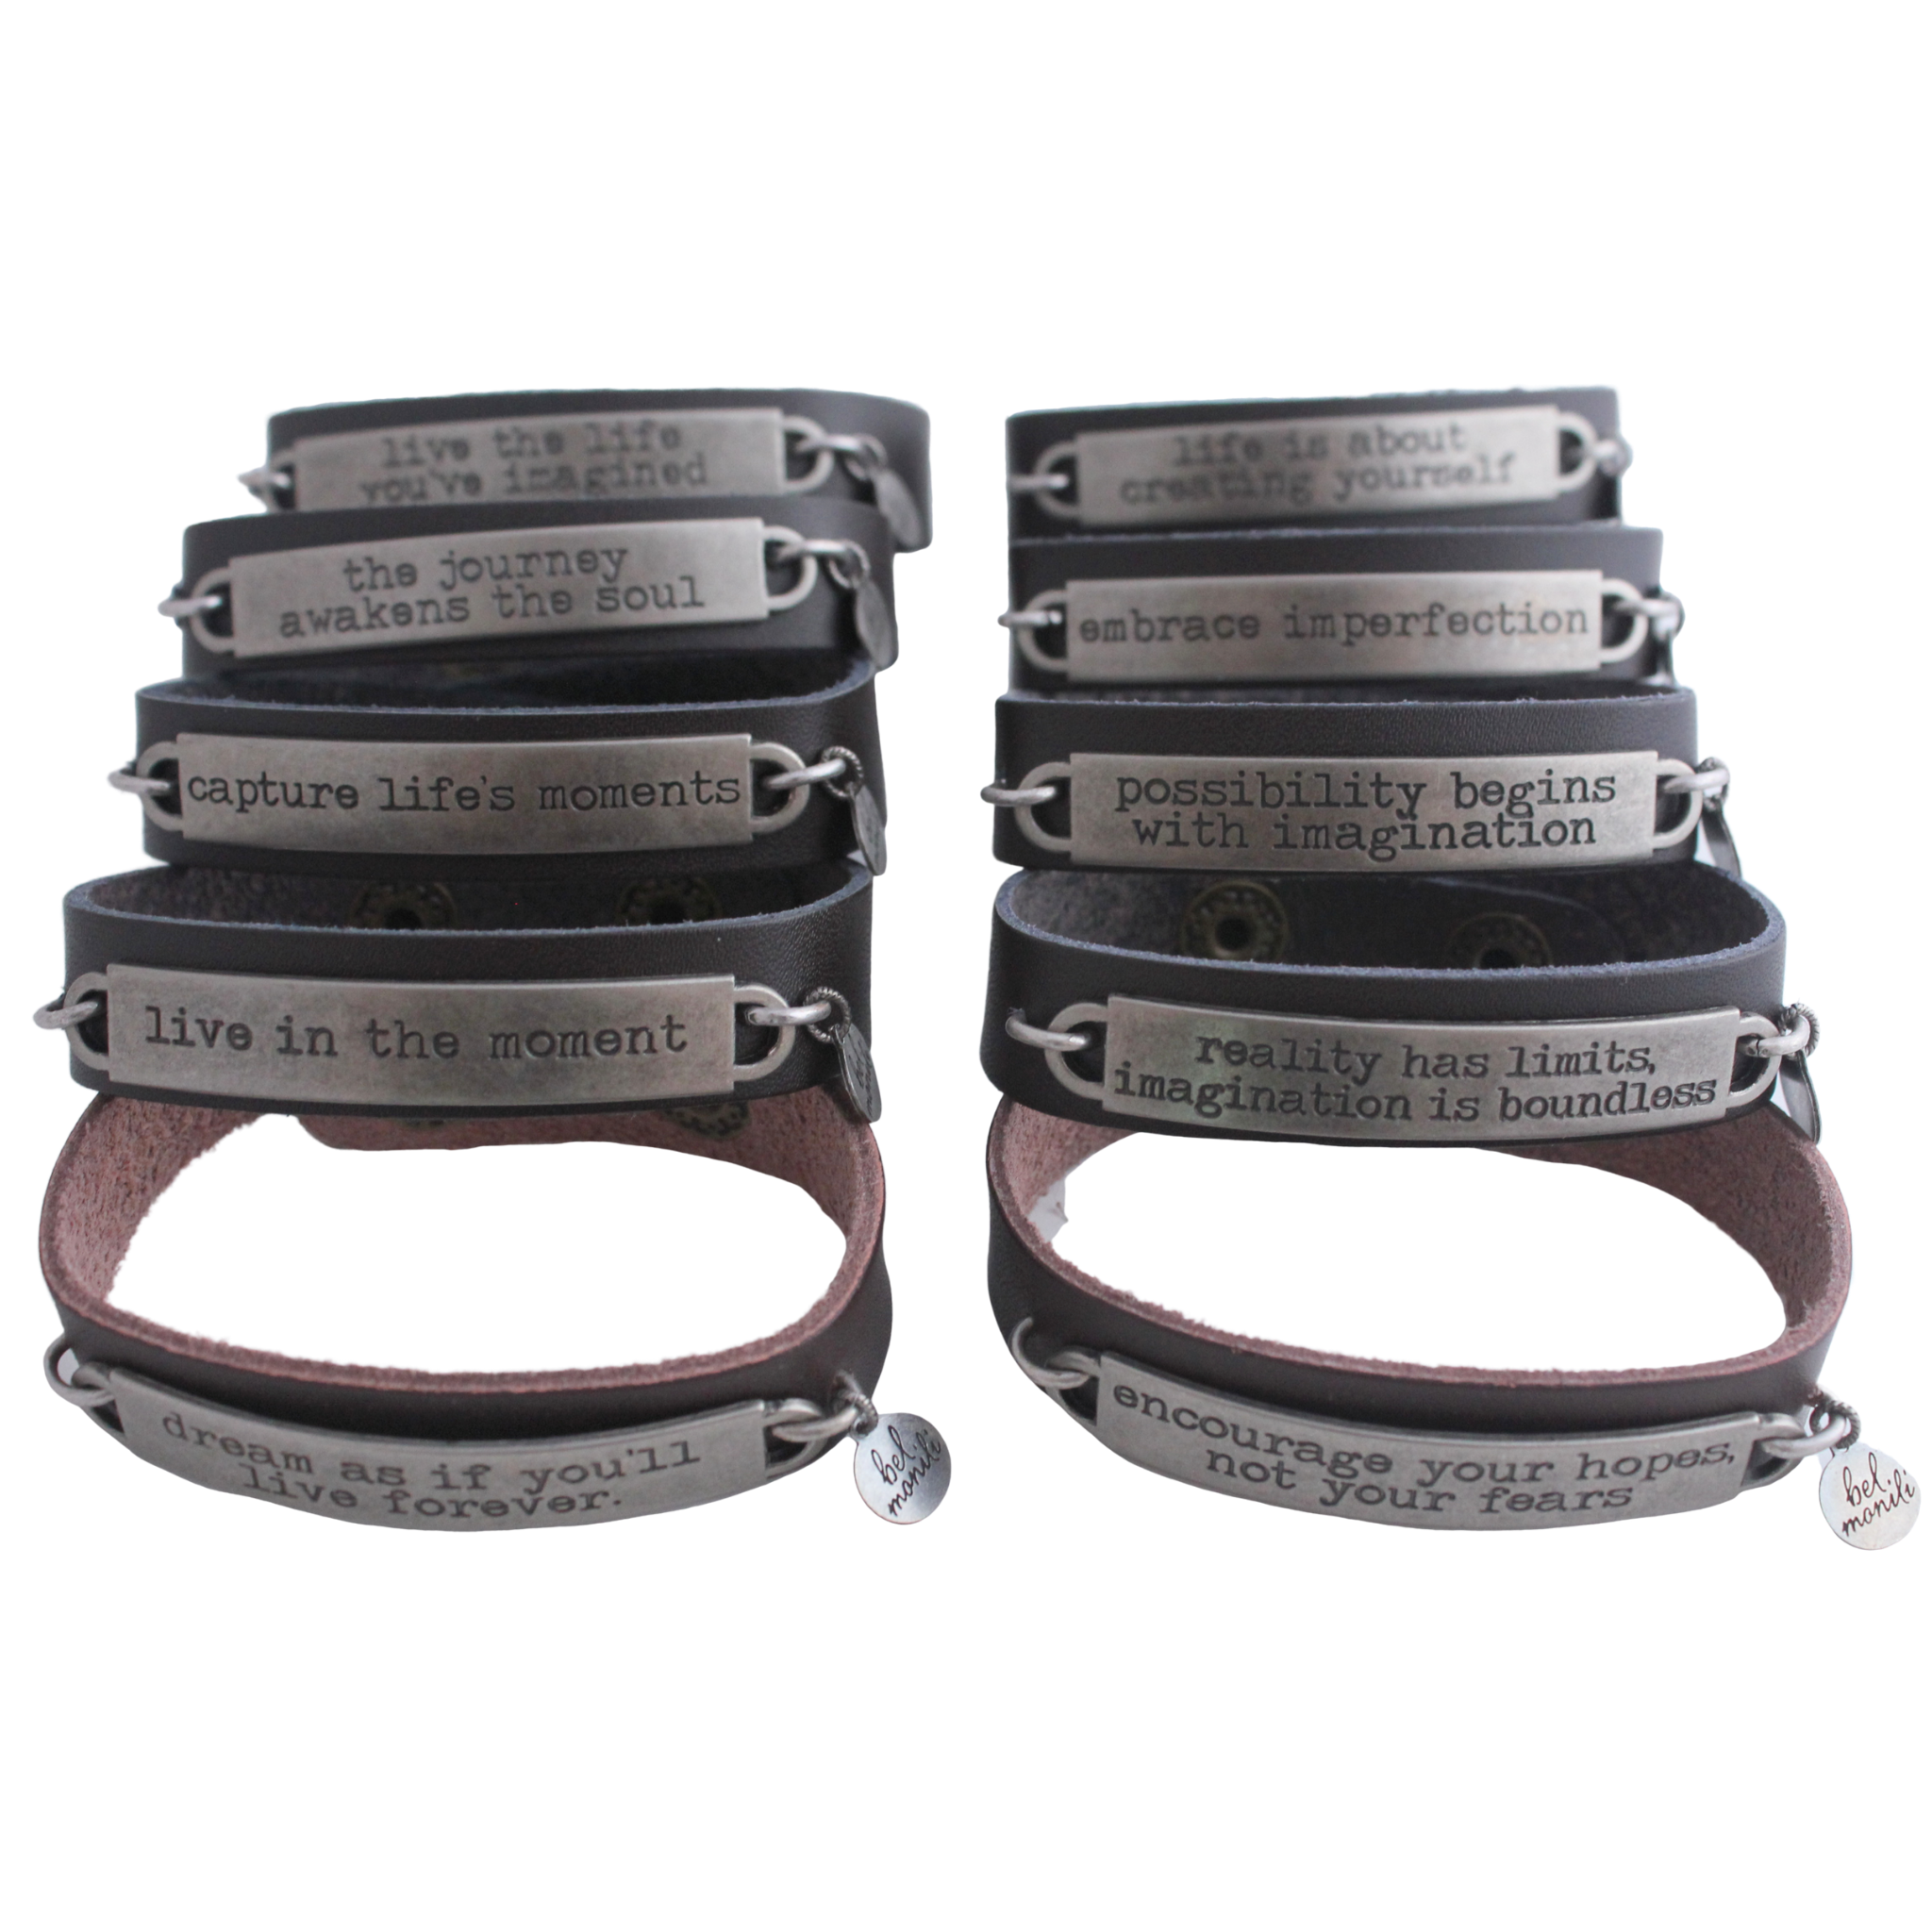 Wholesale Large leather cuff bracelets with vintage metal buckles